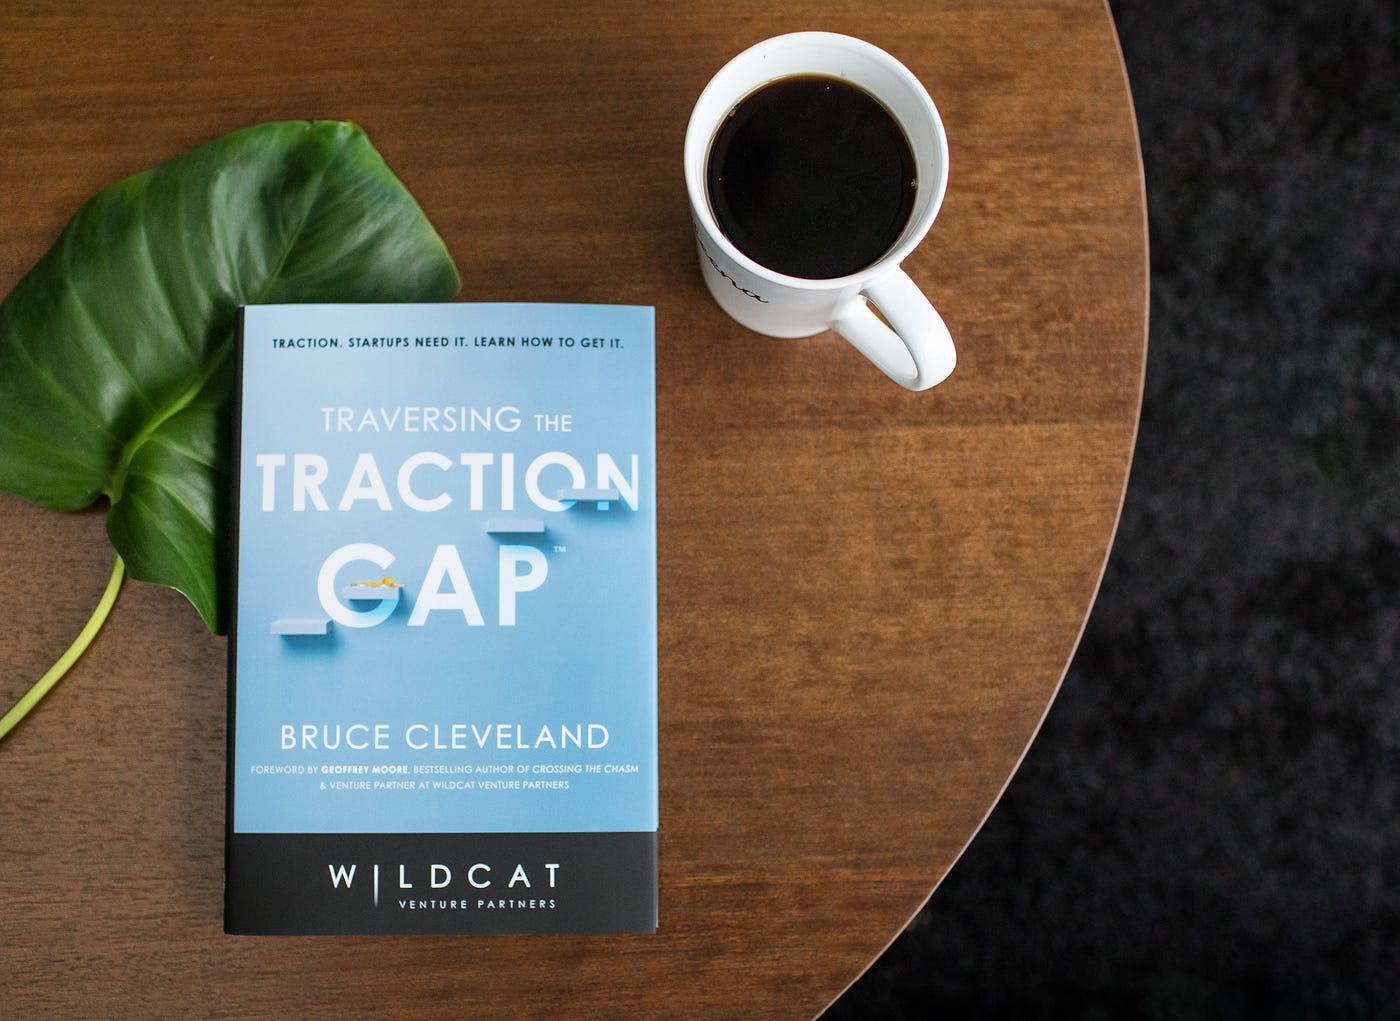 The Traction Gap Framework®: It's Not Just For Startups